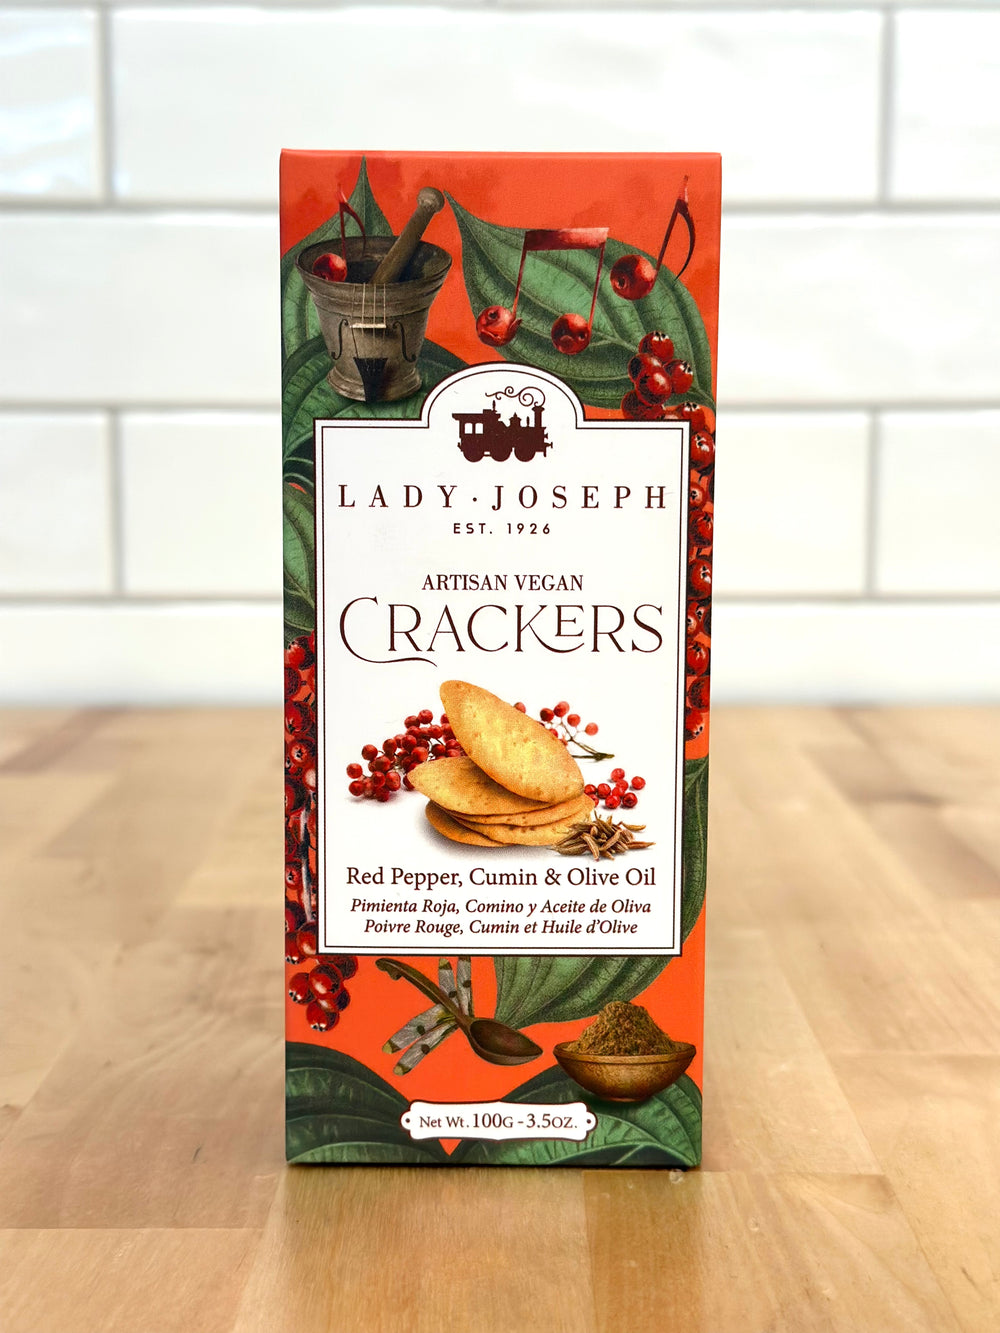 LADY JOSEPH Artisan Vegan Crackers with Red Pepper, Cumin and Olive Oil